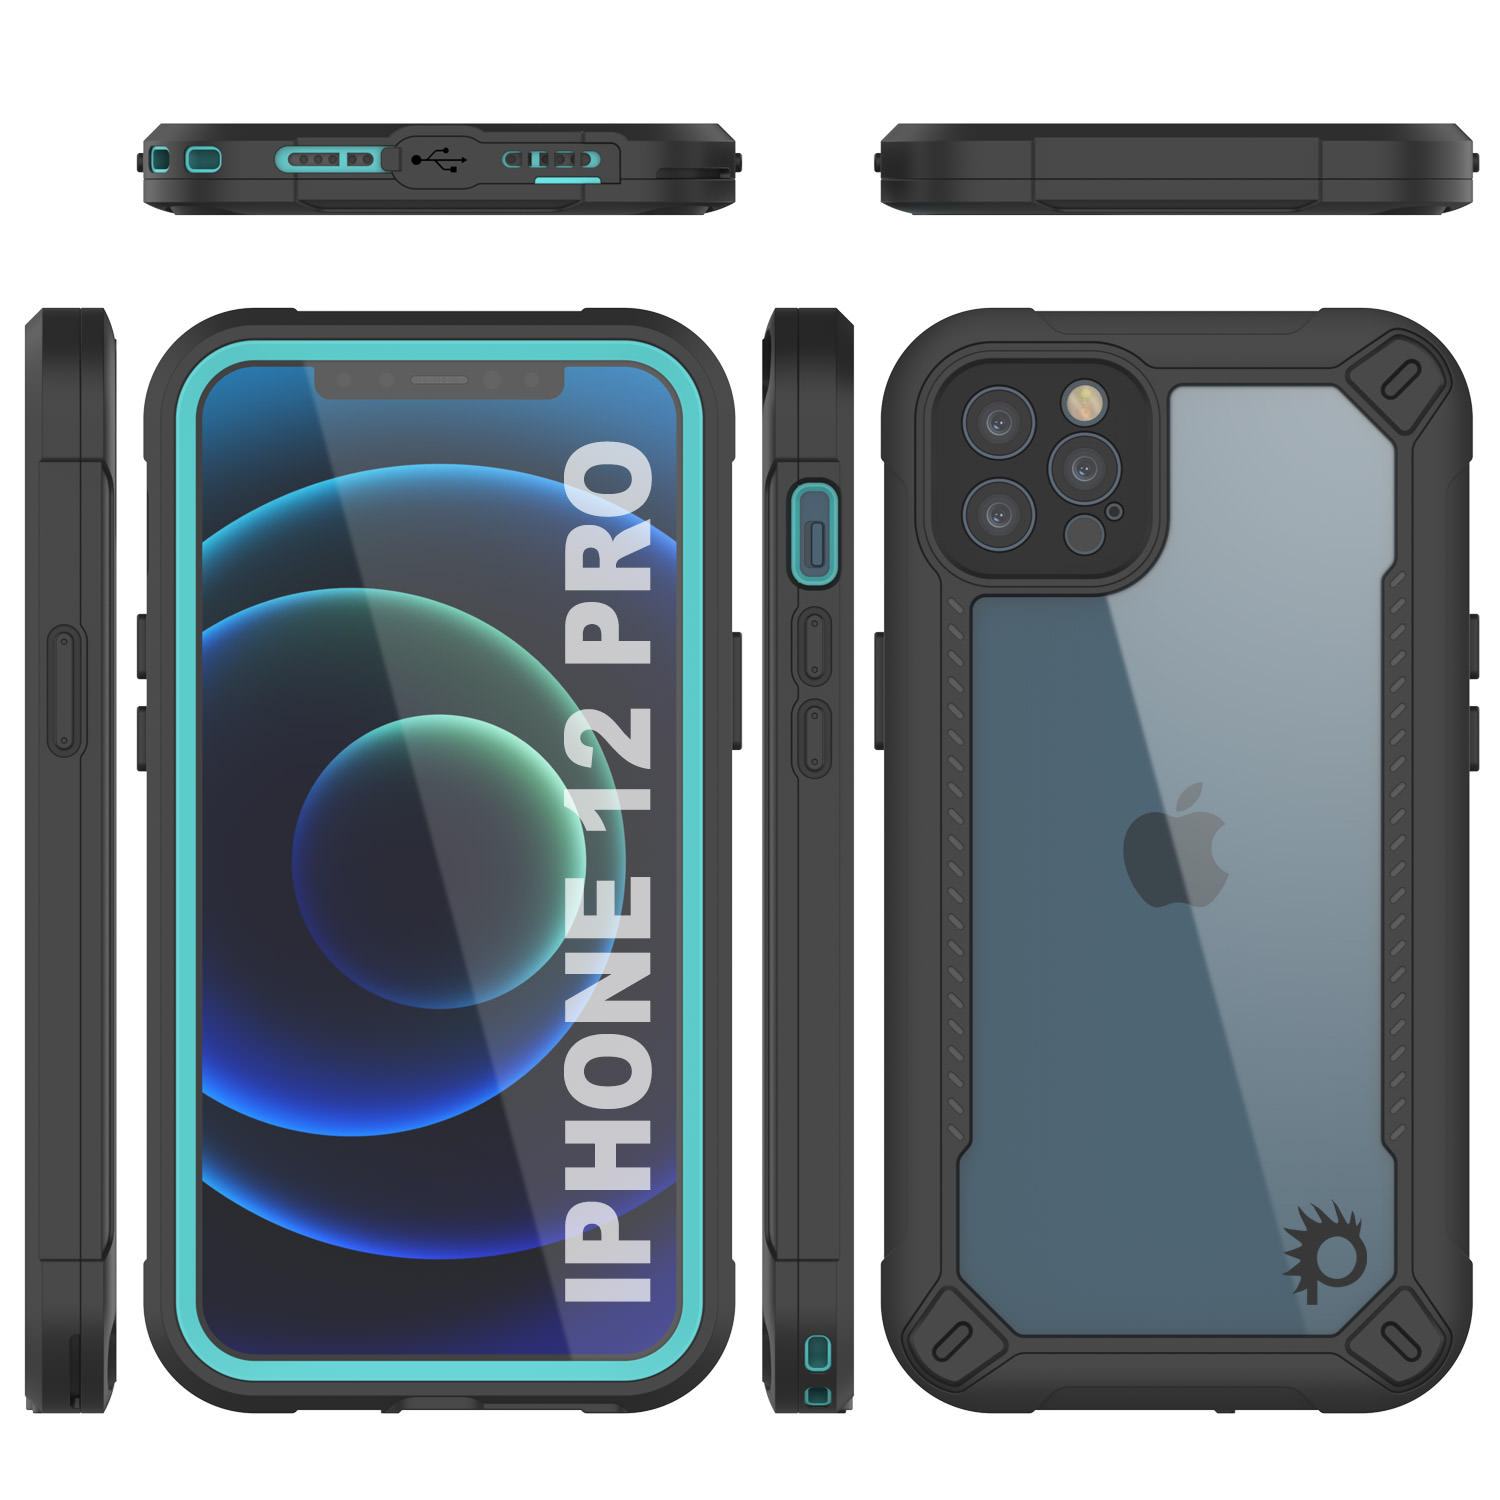 iPhone 12 Pro Waterproof IP68 Case, Punkcase [teal]  [Maximus Series] [Slim Fit] [IP68 Certified] [Shockresistant] Clear Armor Cover with Screen Protector | Ultimate Protection